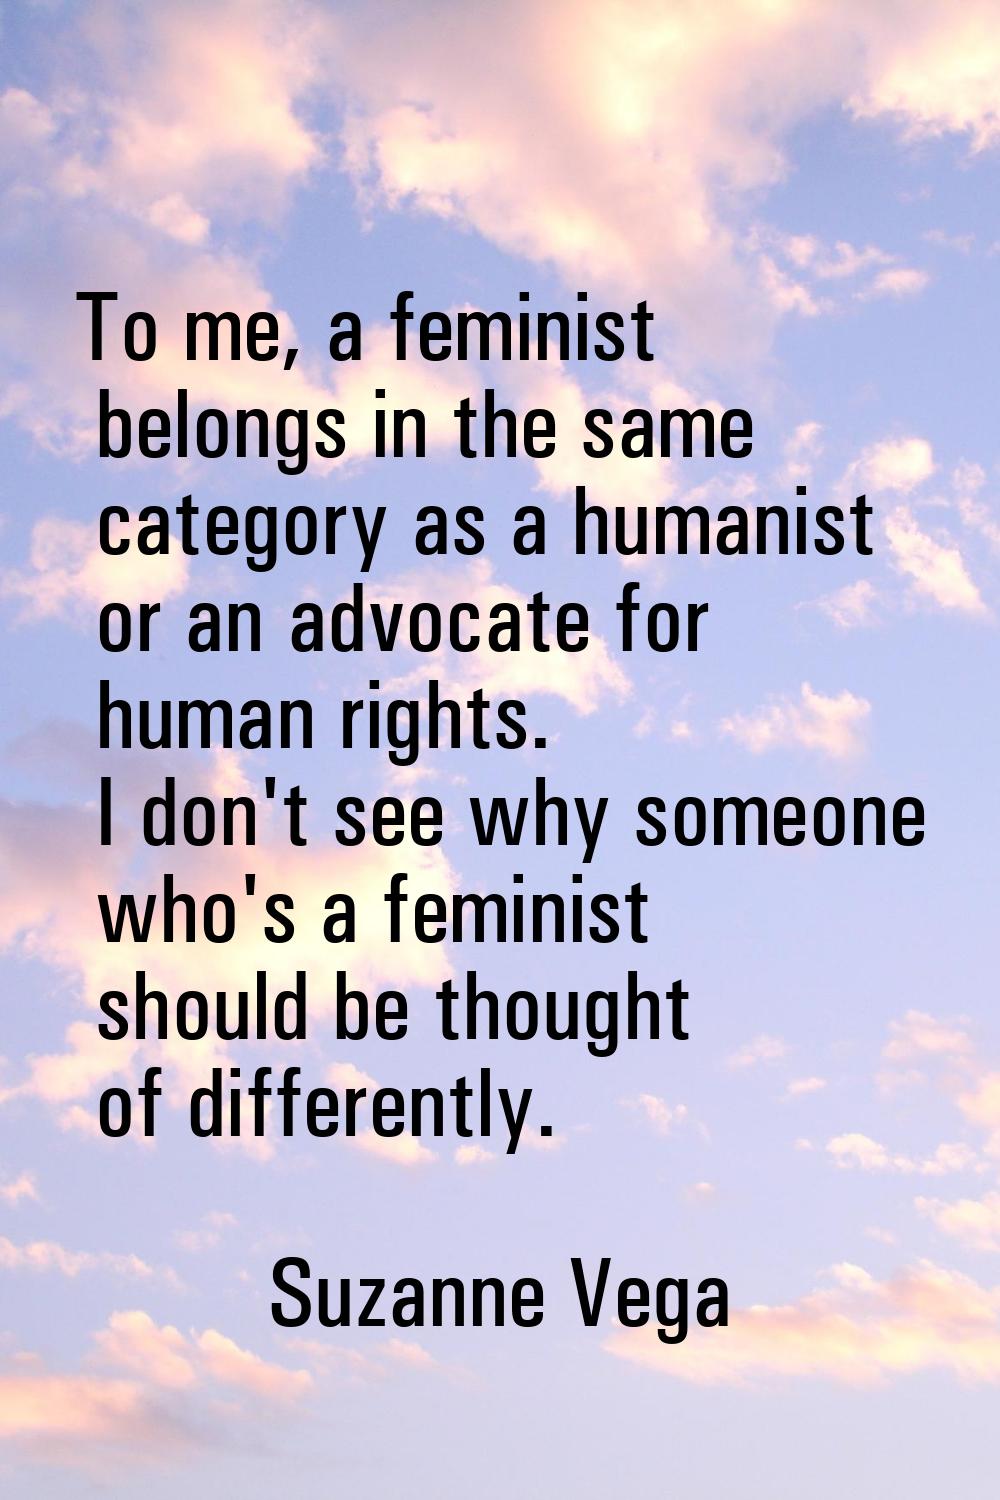 To me, a feminist belongs in the same category as a humanist or an advocate for human rights. I don